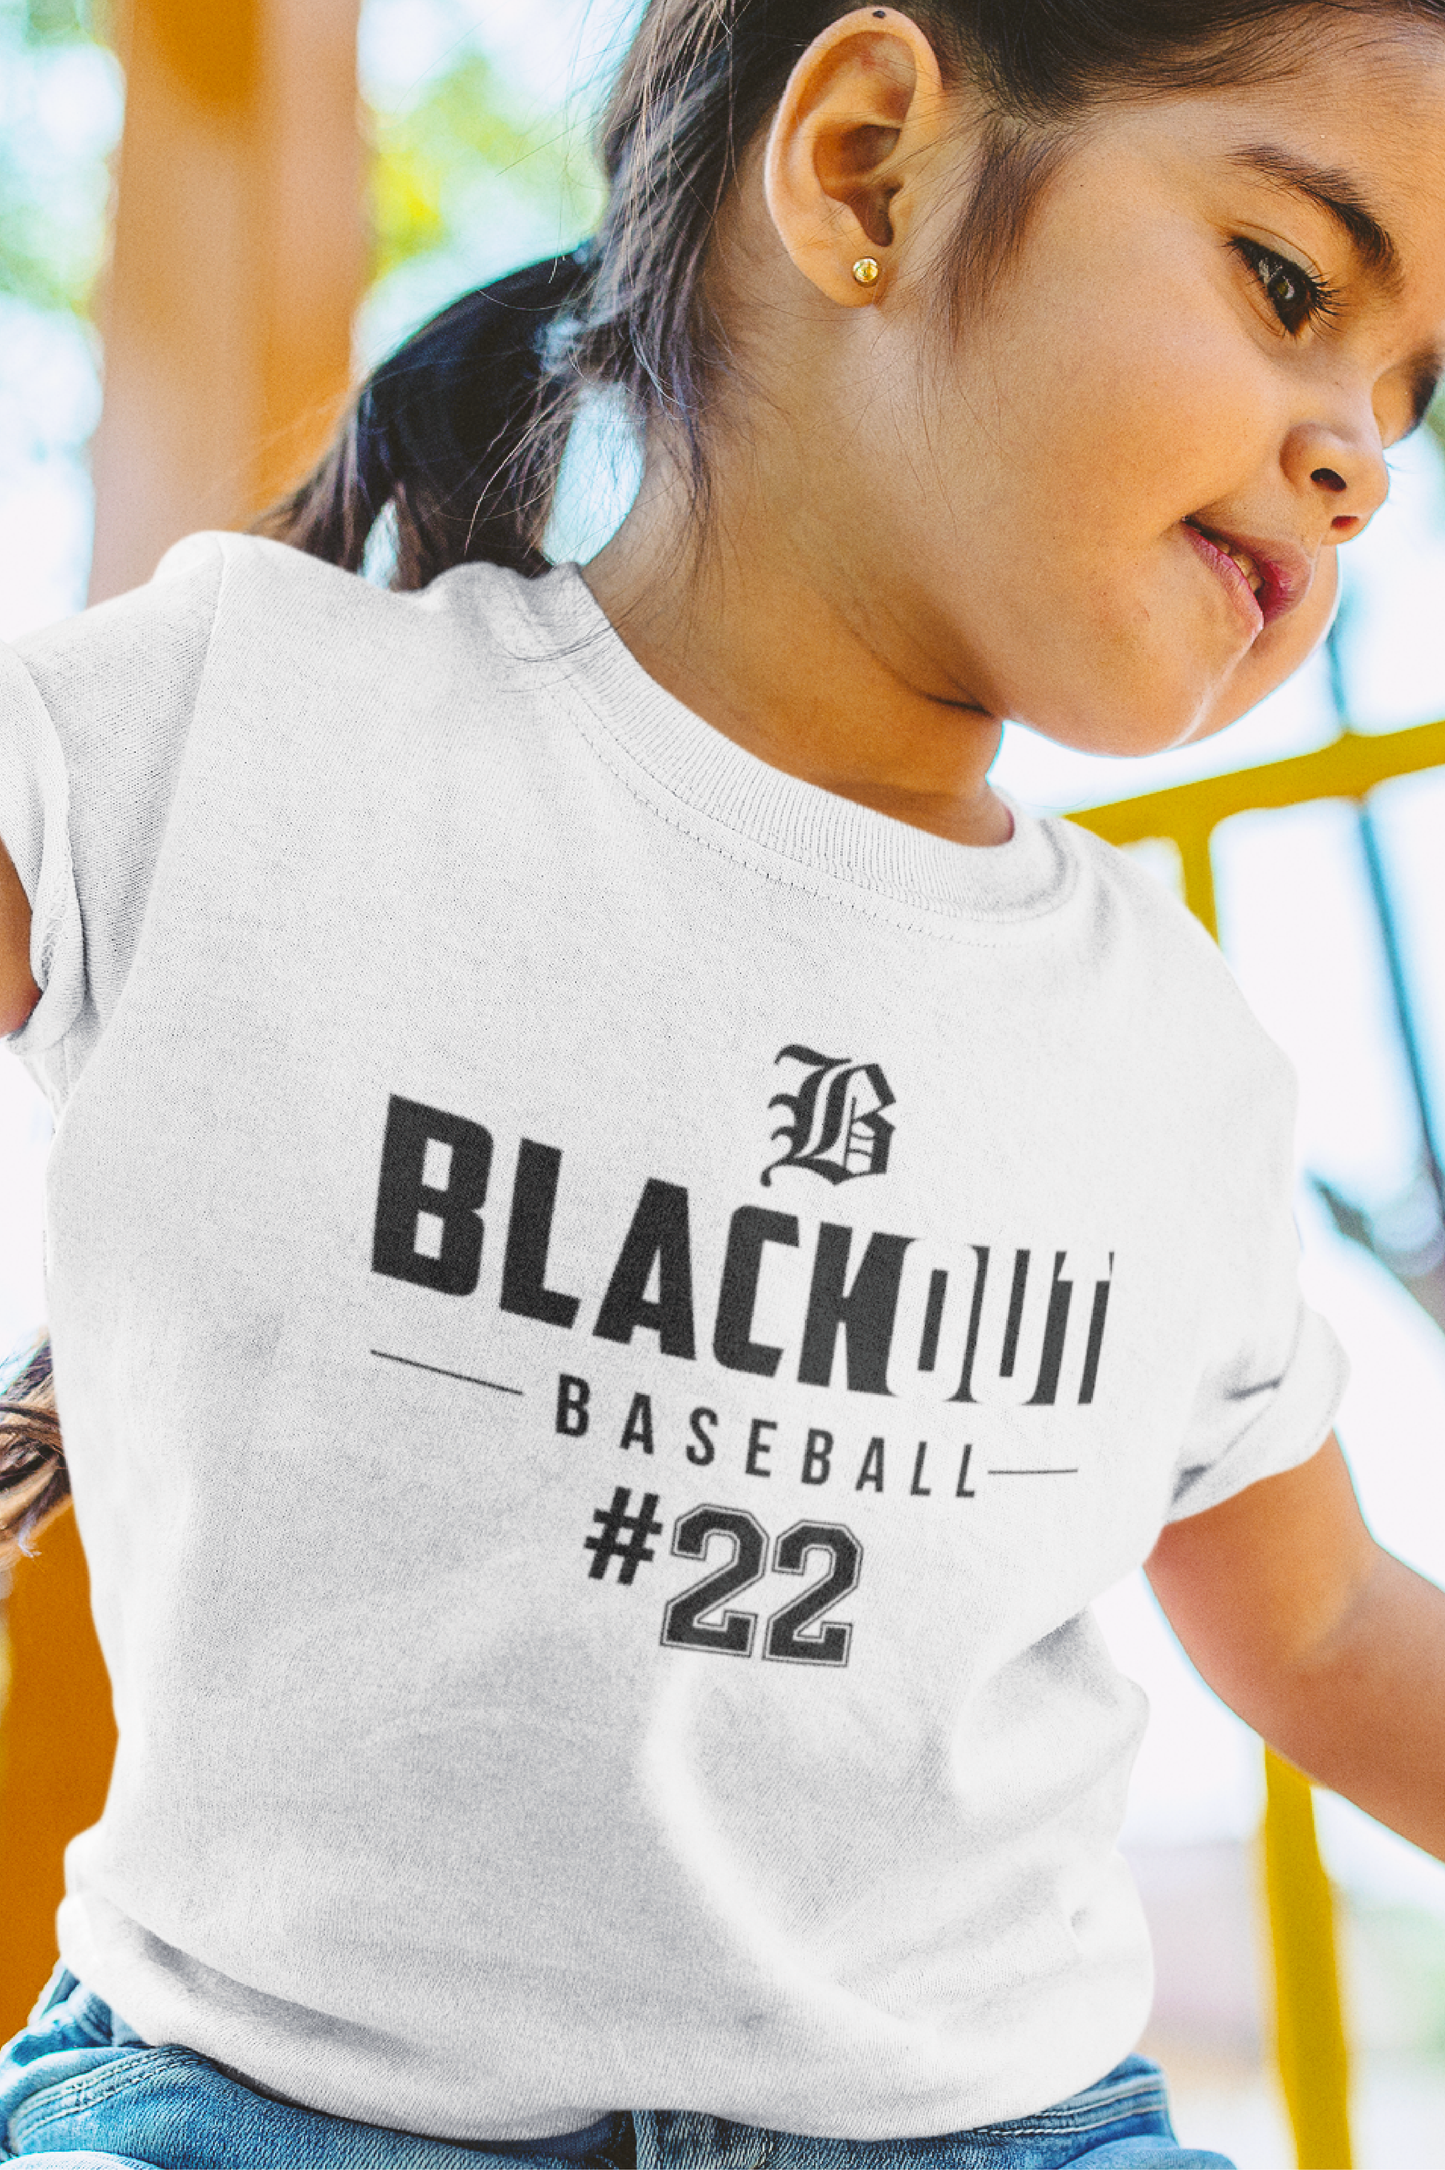 YOUTH - PERSONALIZED Number - "Blackout Baseball" 100% Cotton - (Black, White, or Gray)